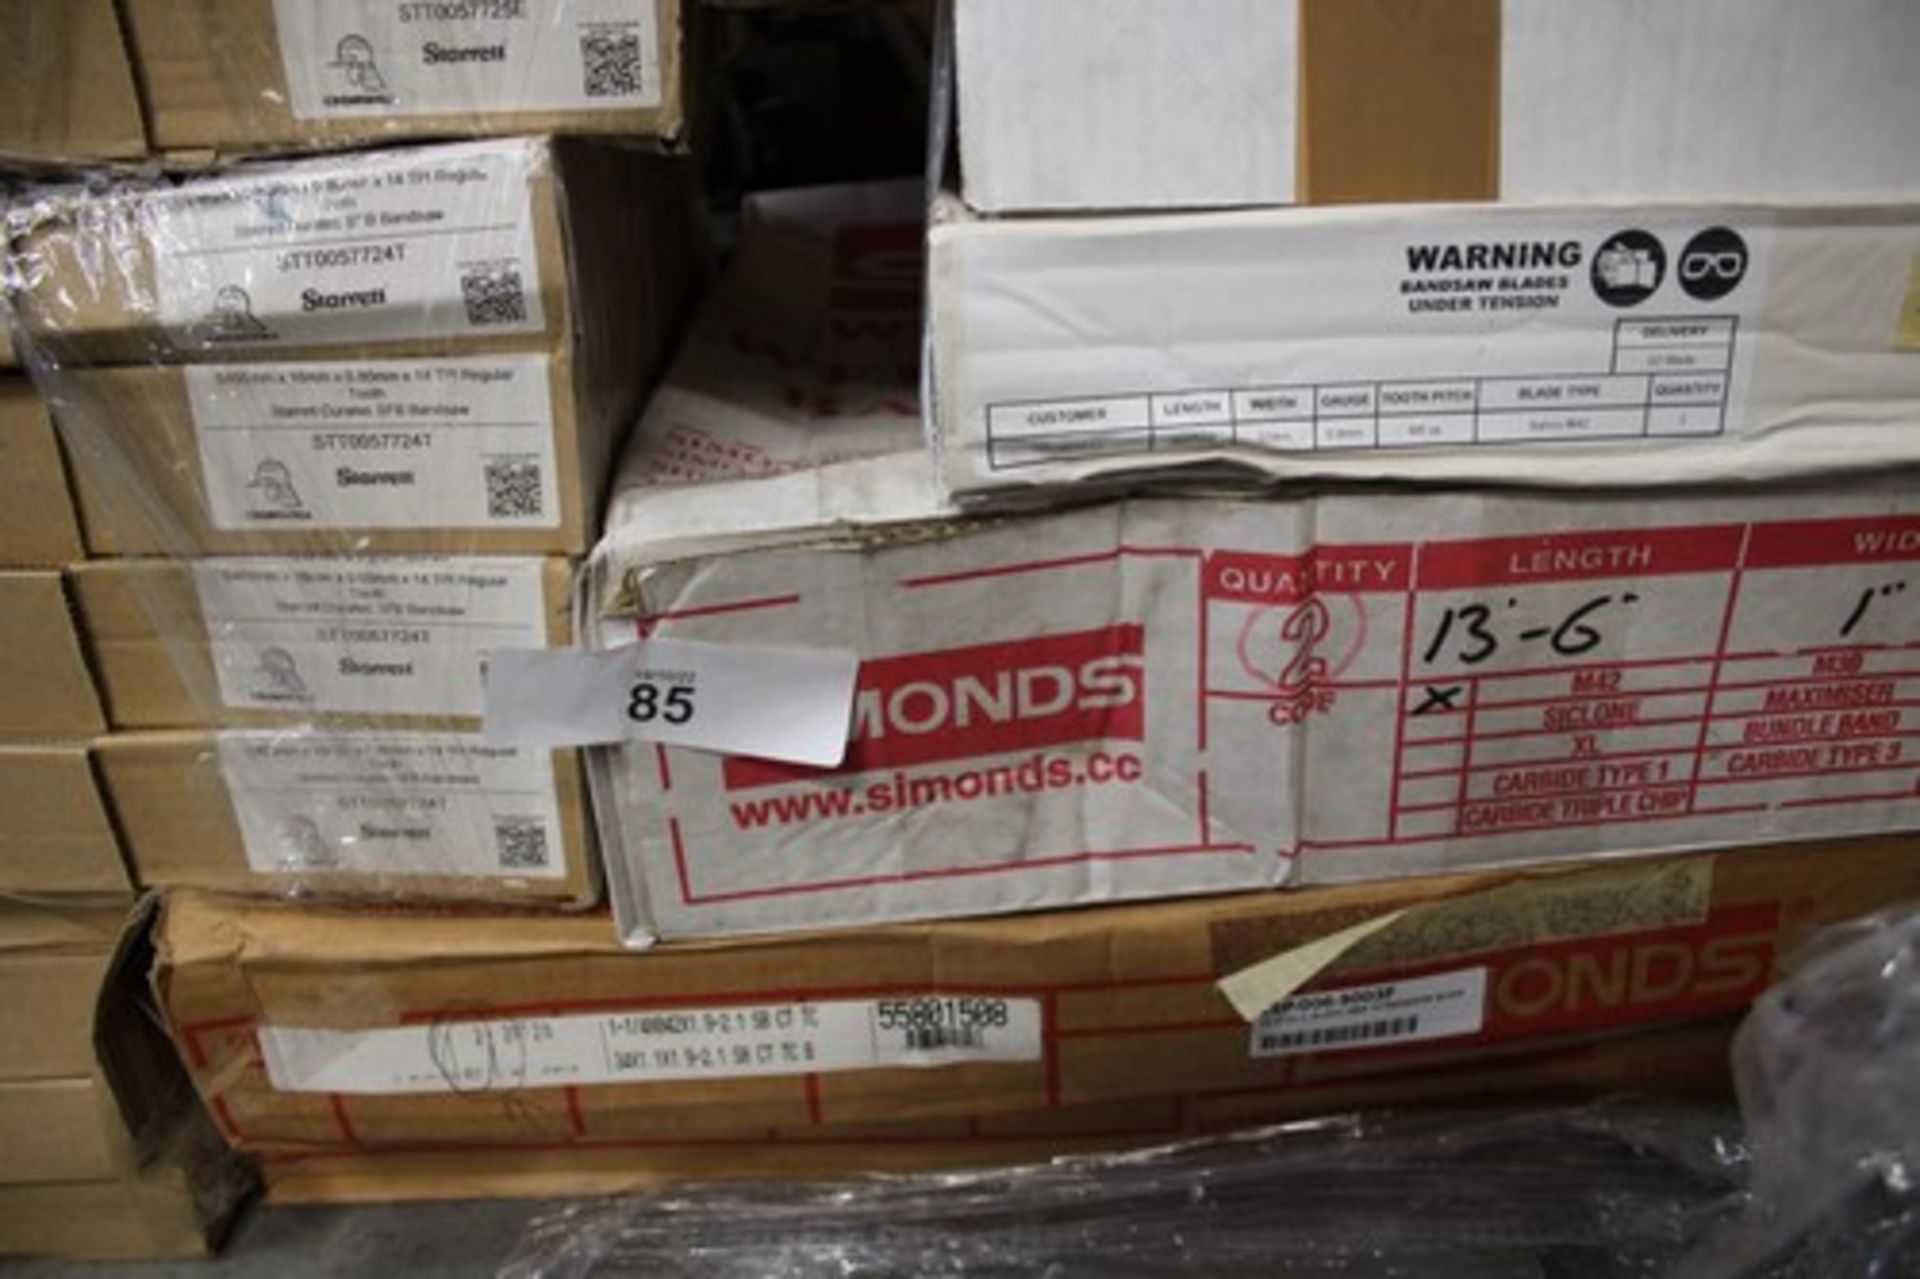 Approximately a half pallet of Starrett and Simonds band saw blades including 17ft 6", 12ft 27mm 0. - Image 4 of 4